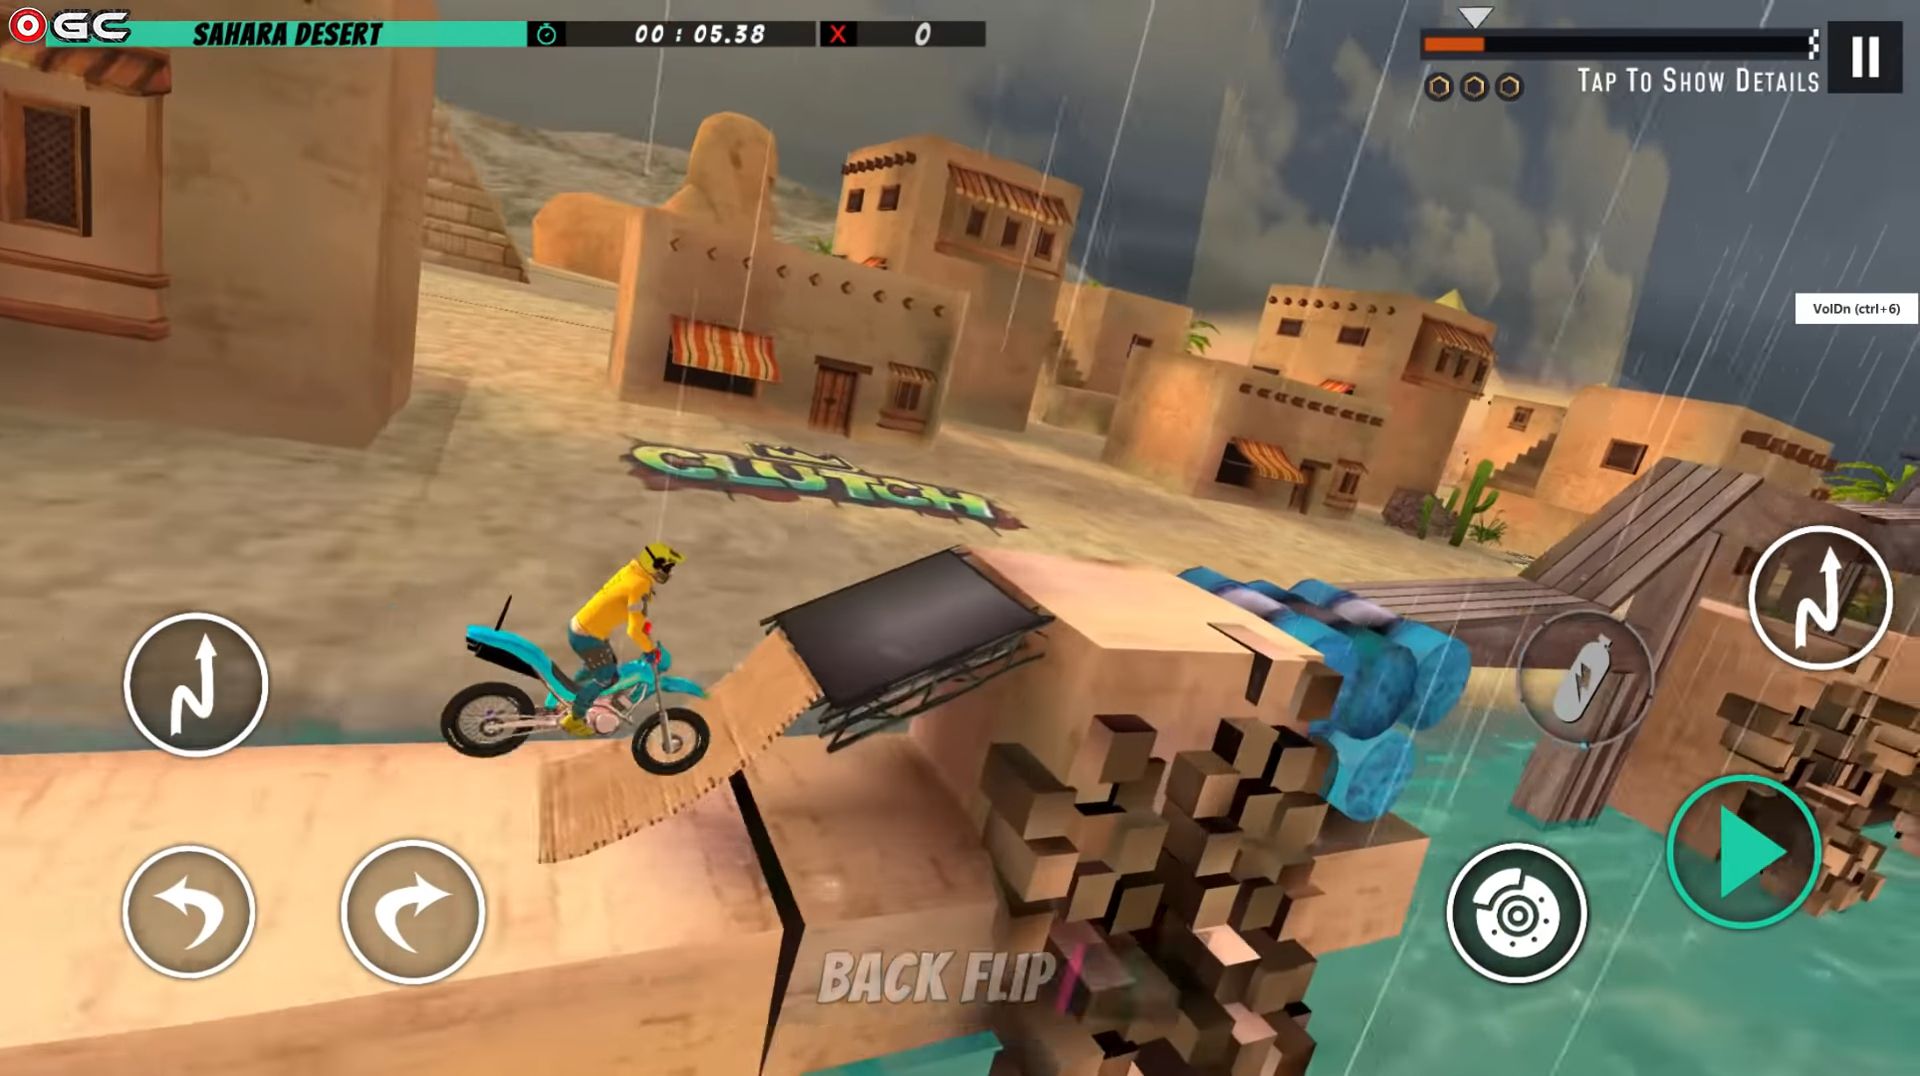 Bike Stunt 2 New Motorcycle Game - New Games 2020 for Android